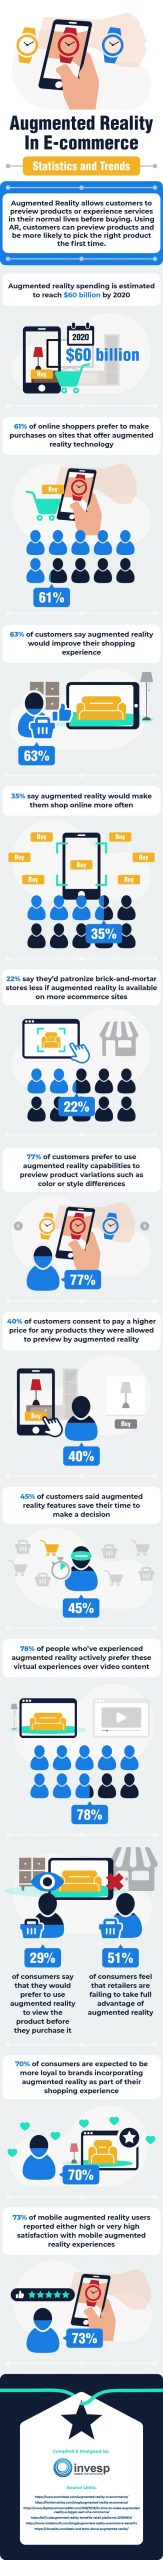 Why Your Business Cannot Afford Not to Include Augmented Realty in 2020 [Infographic]